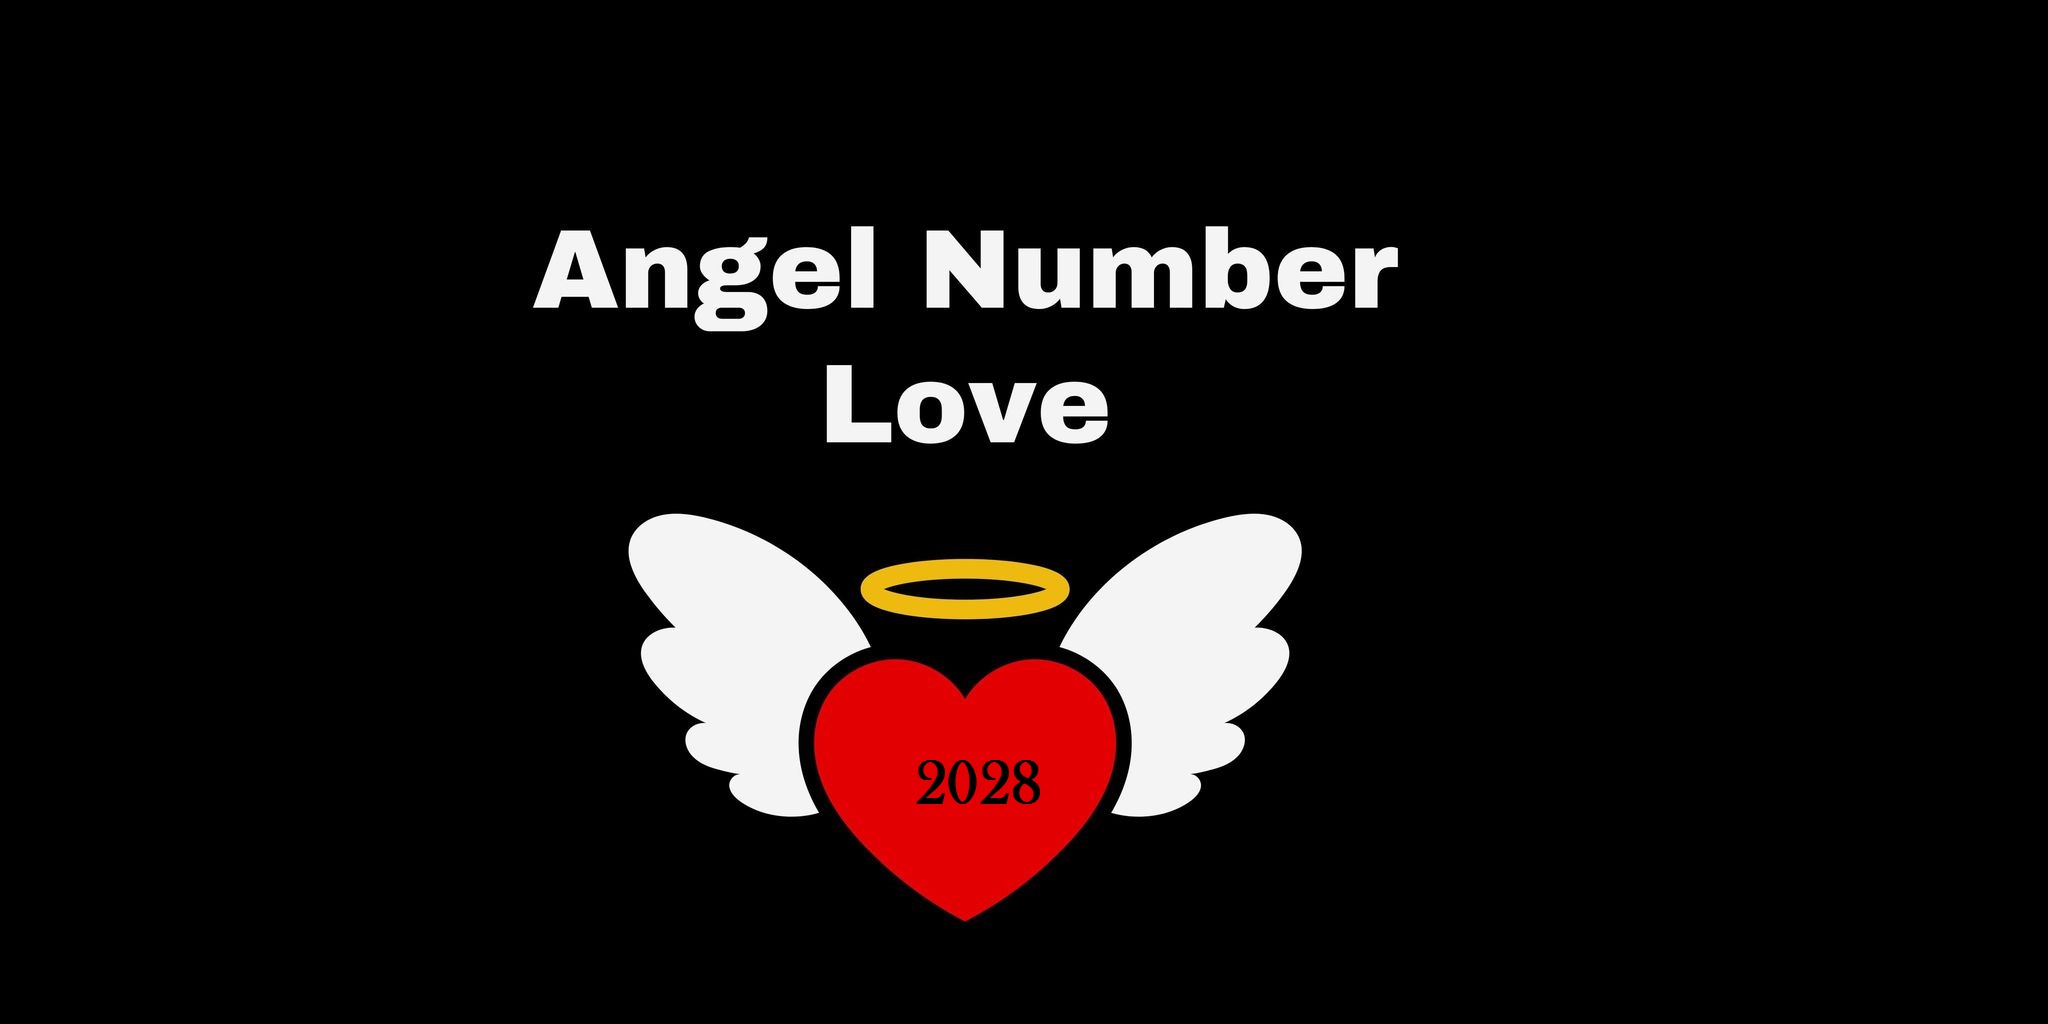 2028 Angel Number Meaning In Love